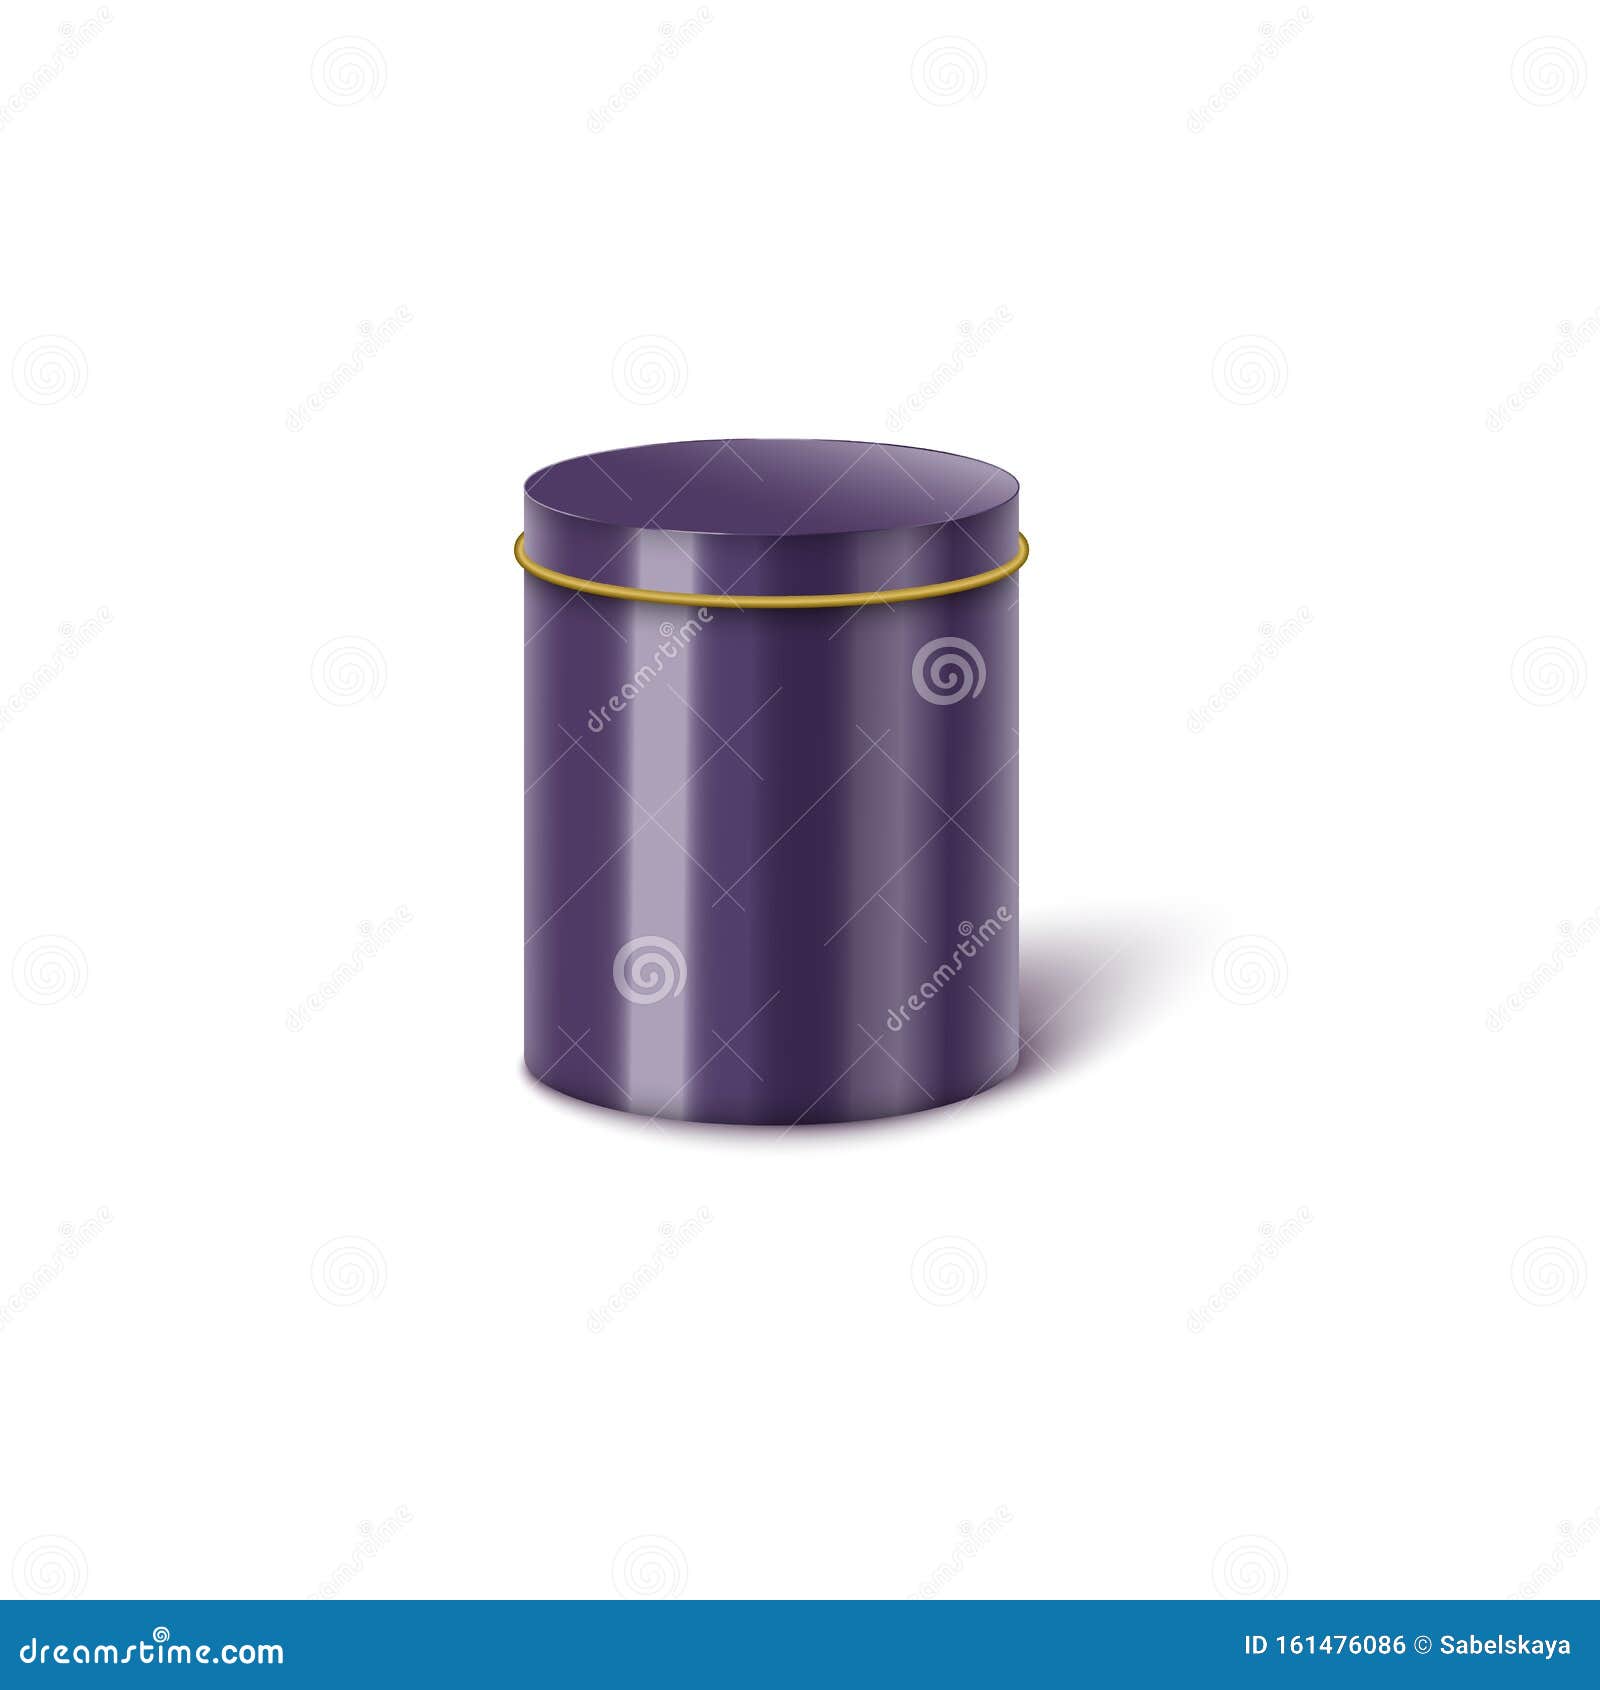 Download Violet Metal Cylindrical Box Mockup Realistic Vector ...